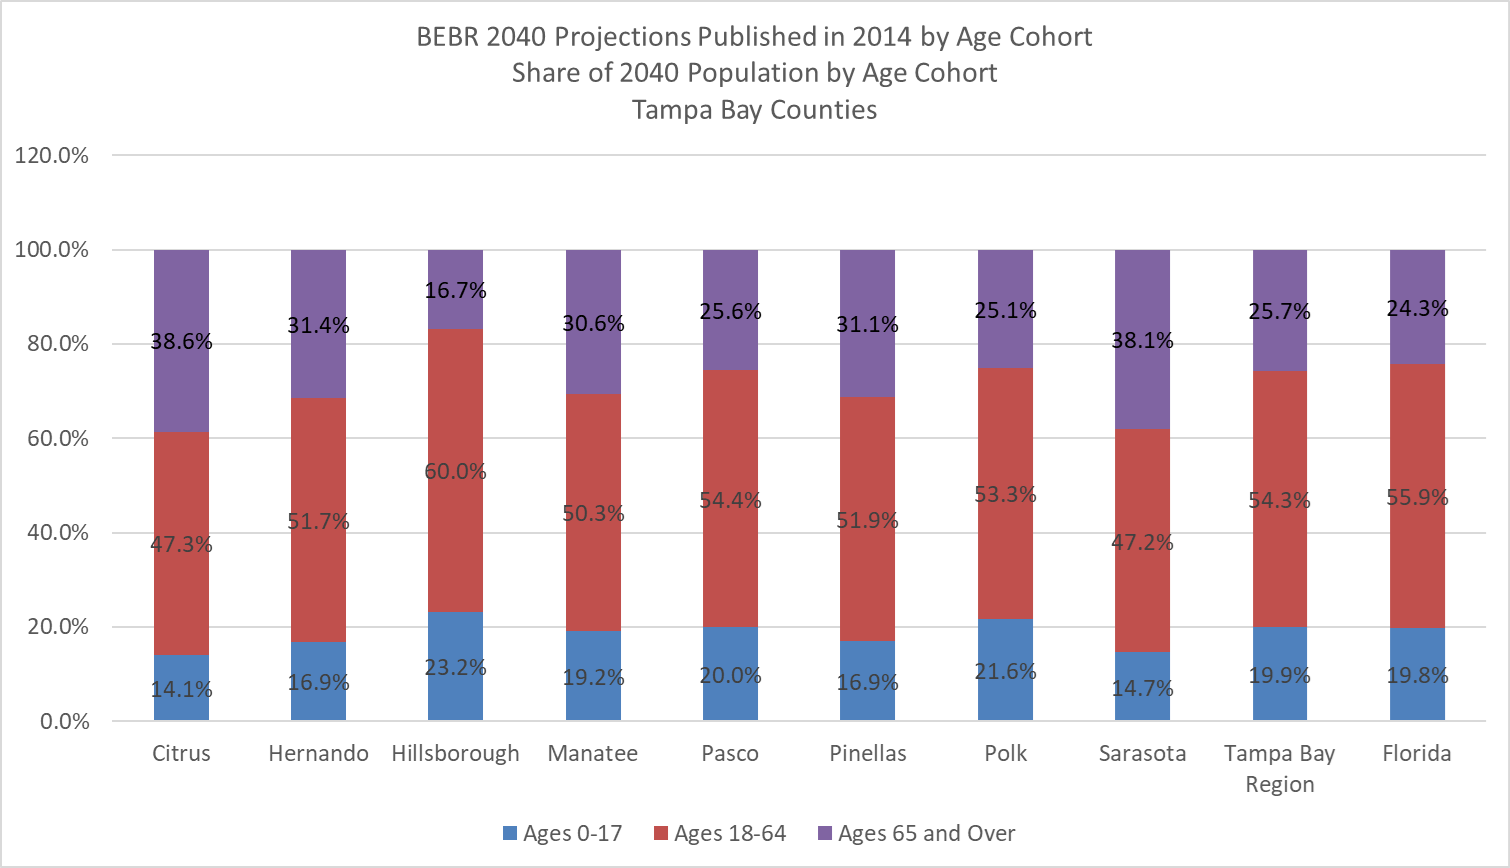 This chart shows share of BEBR 2040 population published in 2014 by age cohort for 8 Tampa Bay Region Counties: Citrus, Hernando, Hillsborough, Manatee, Pasco, Pinellas, Polk, and Sarasota. It also shows population shares by age cohort to the Tampa Bay Region and the all of Florida. The share of 2040 residents less than 17 years old averages 18.3%. It ranges from 14.1% in Citrus County to 23.2% in Hillsborough County. The share of 2040 residents between 18 and 64 years old averages 52%. It ranges from 47.2% in Sarasota County to 60% in Hillsborough County. Lastly, the share of 2021 residents between over 65 years old averages 29.7%. It ranges from 16.7% in Hillsborough County to 38.6% in Citrus County.